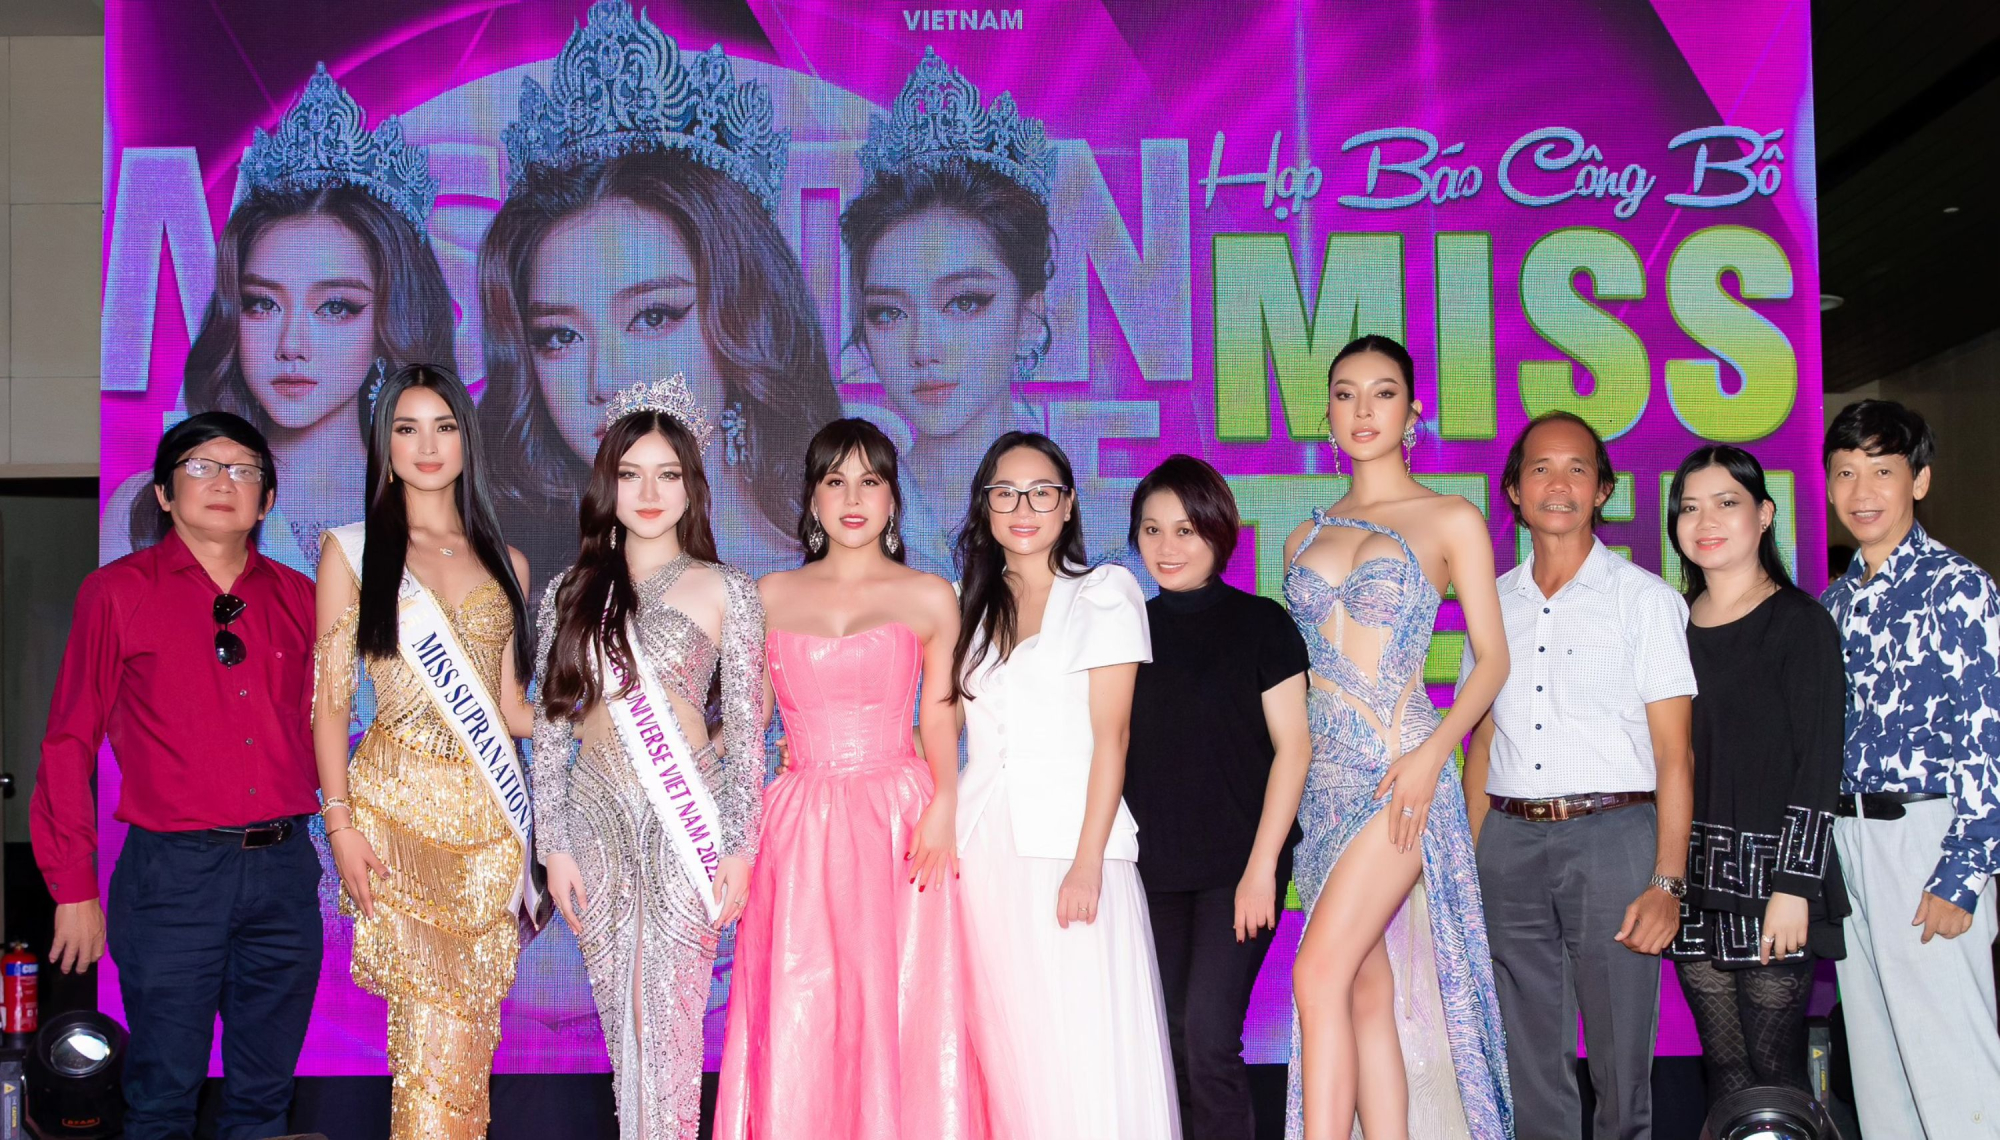 mrs united nations nguyen nhu quynh dong hanh cung nu sinh 17 tuoi tham du miss teen universe 2022 tai my hinh 2